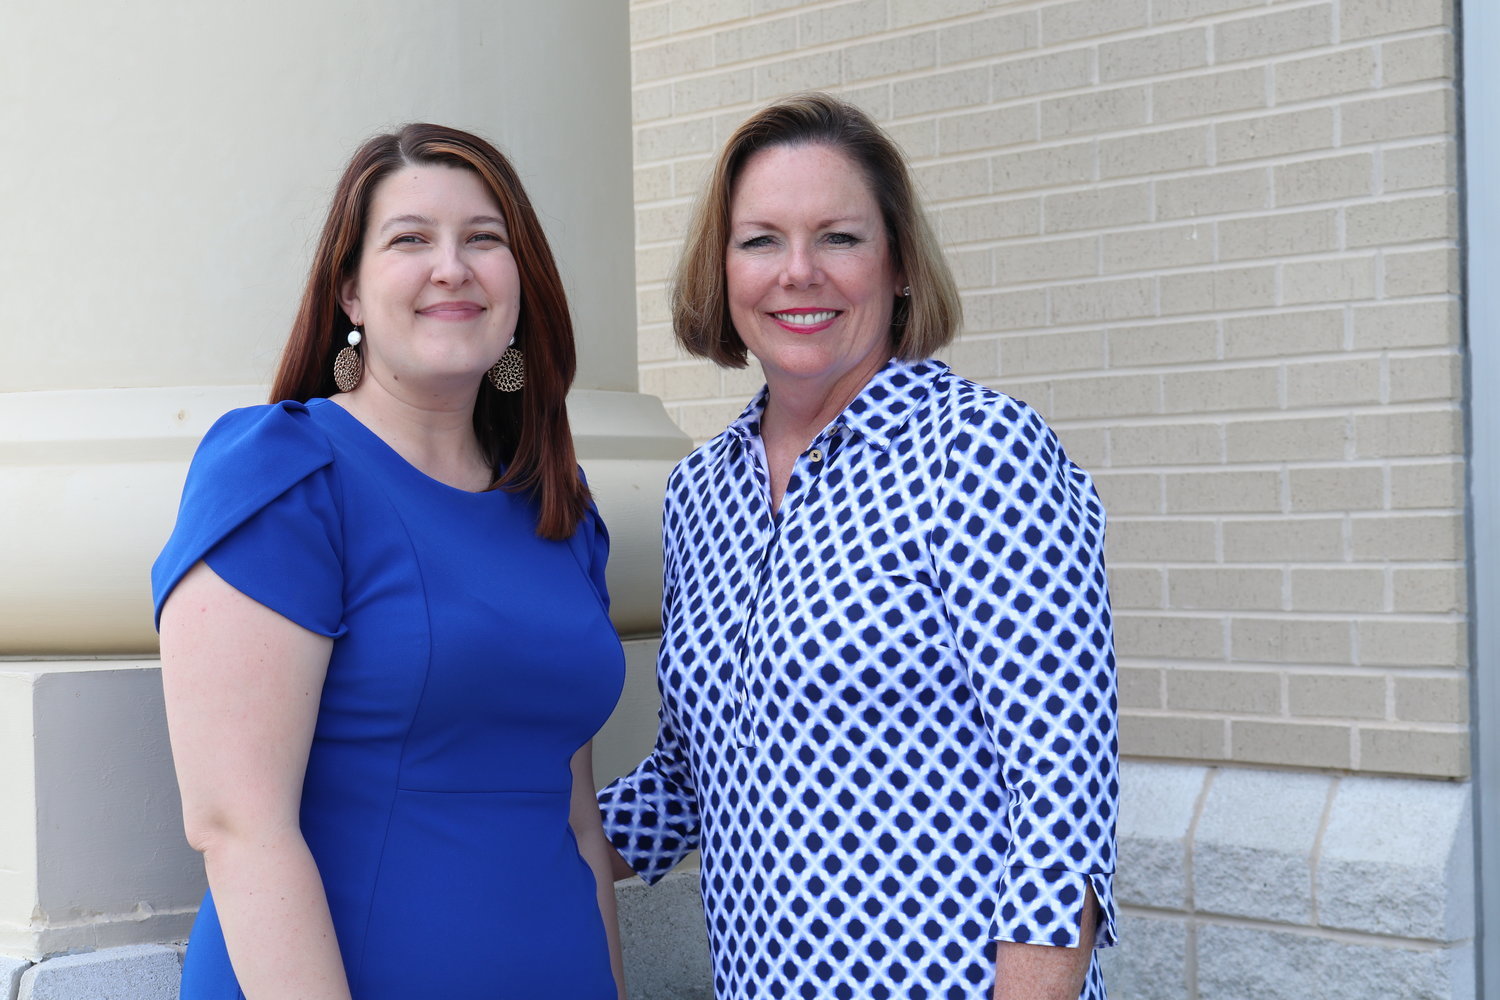 Sarah Sardlis, Baldwin County Virtual Elementary/Middle Schoo's new principal this year, and Janice Simon, lead teacher, are seen in June 2022 as the school prepared expansions with the addition of new activities and offerings for students.